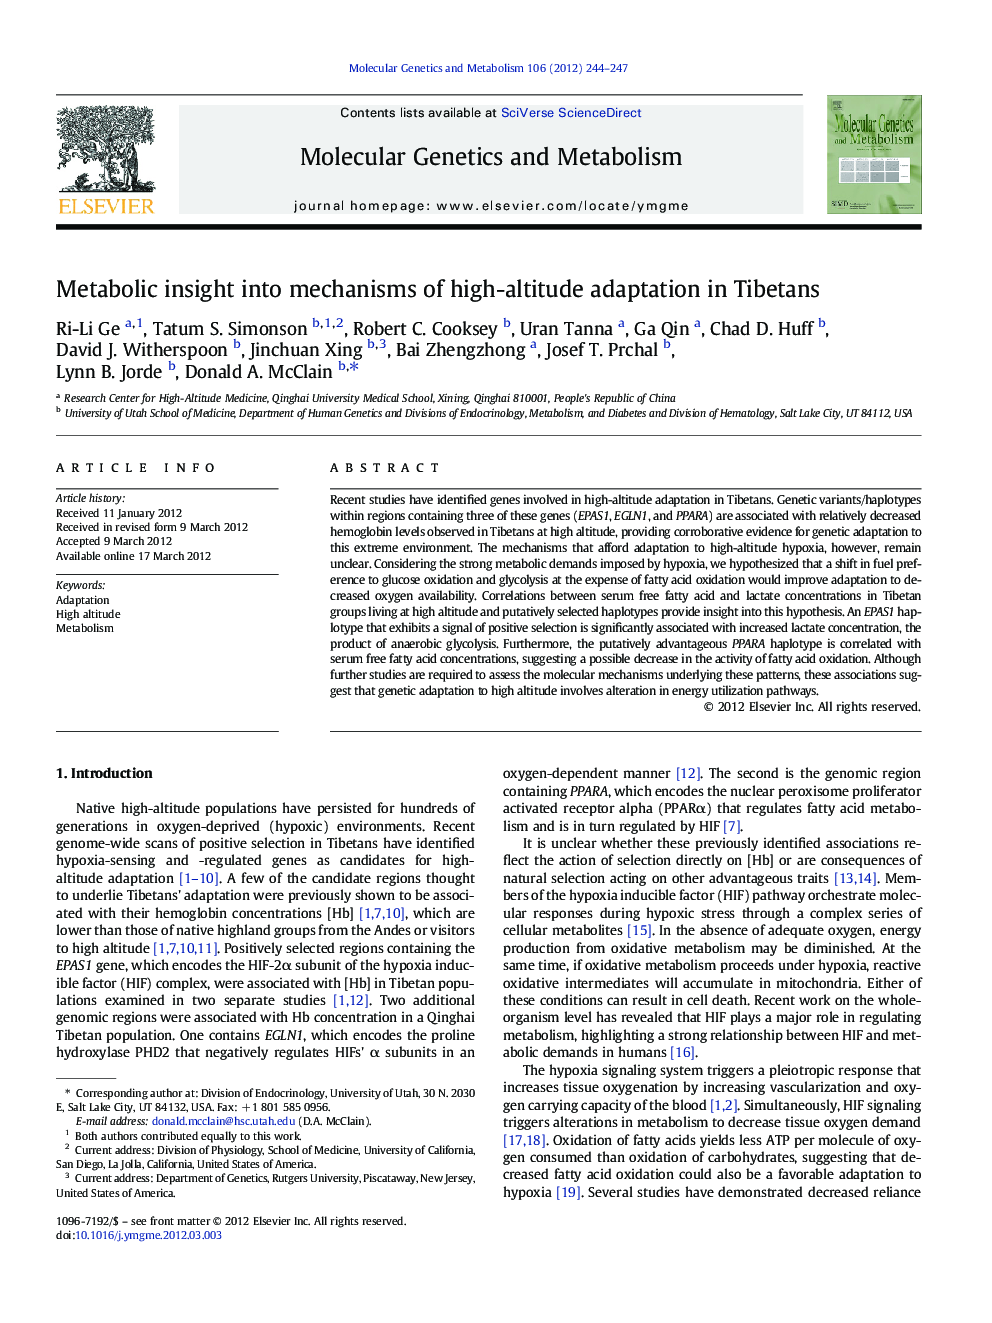 Metabolic insight into mechanisms of high-altitude adaptation in Tibetans